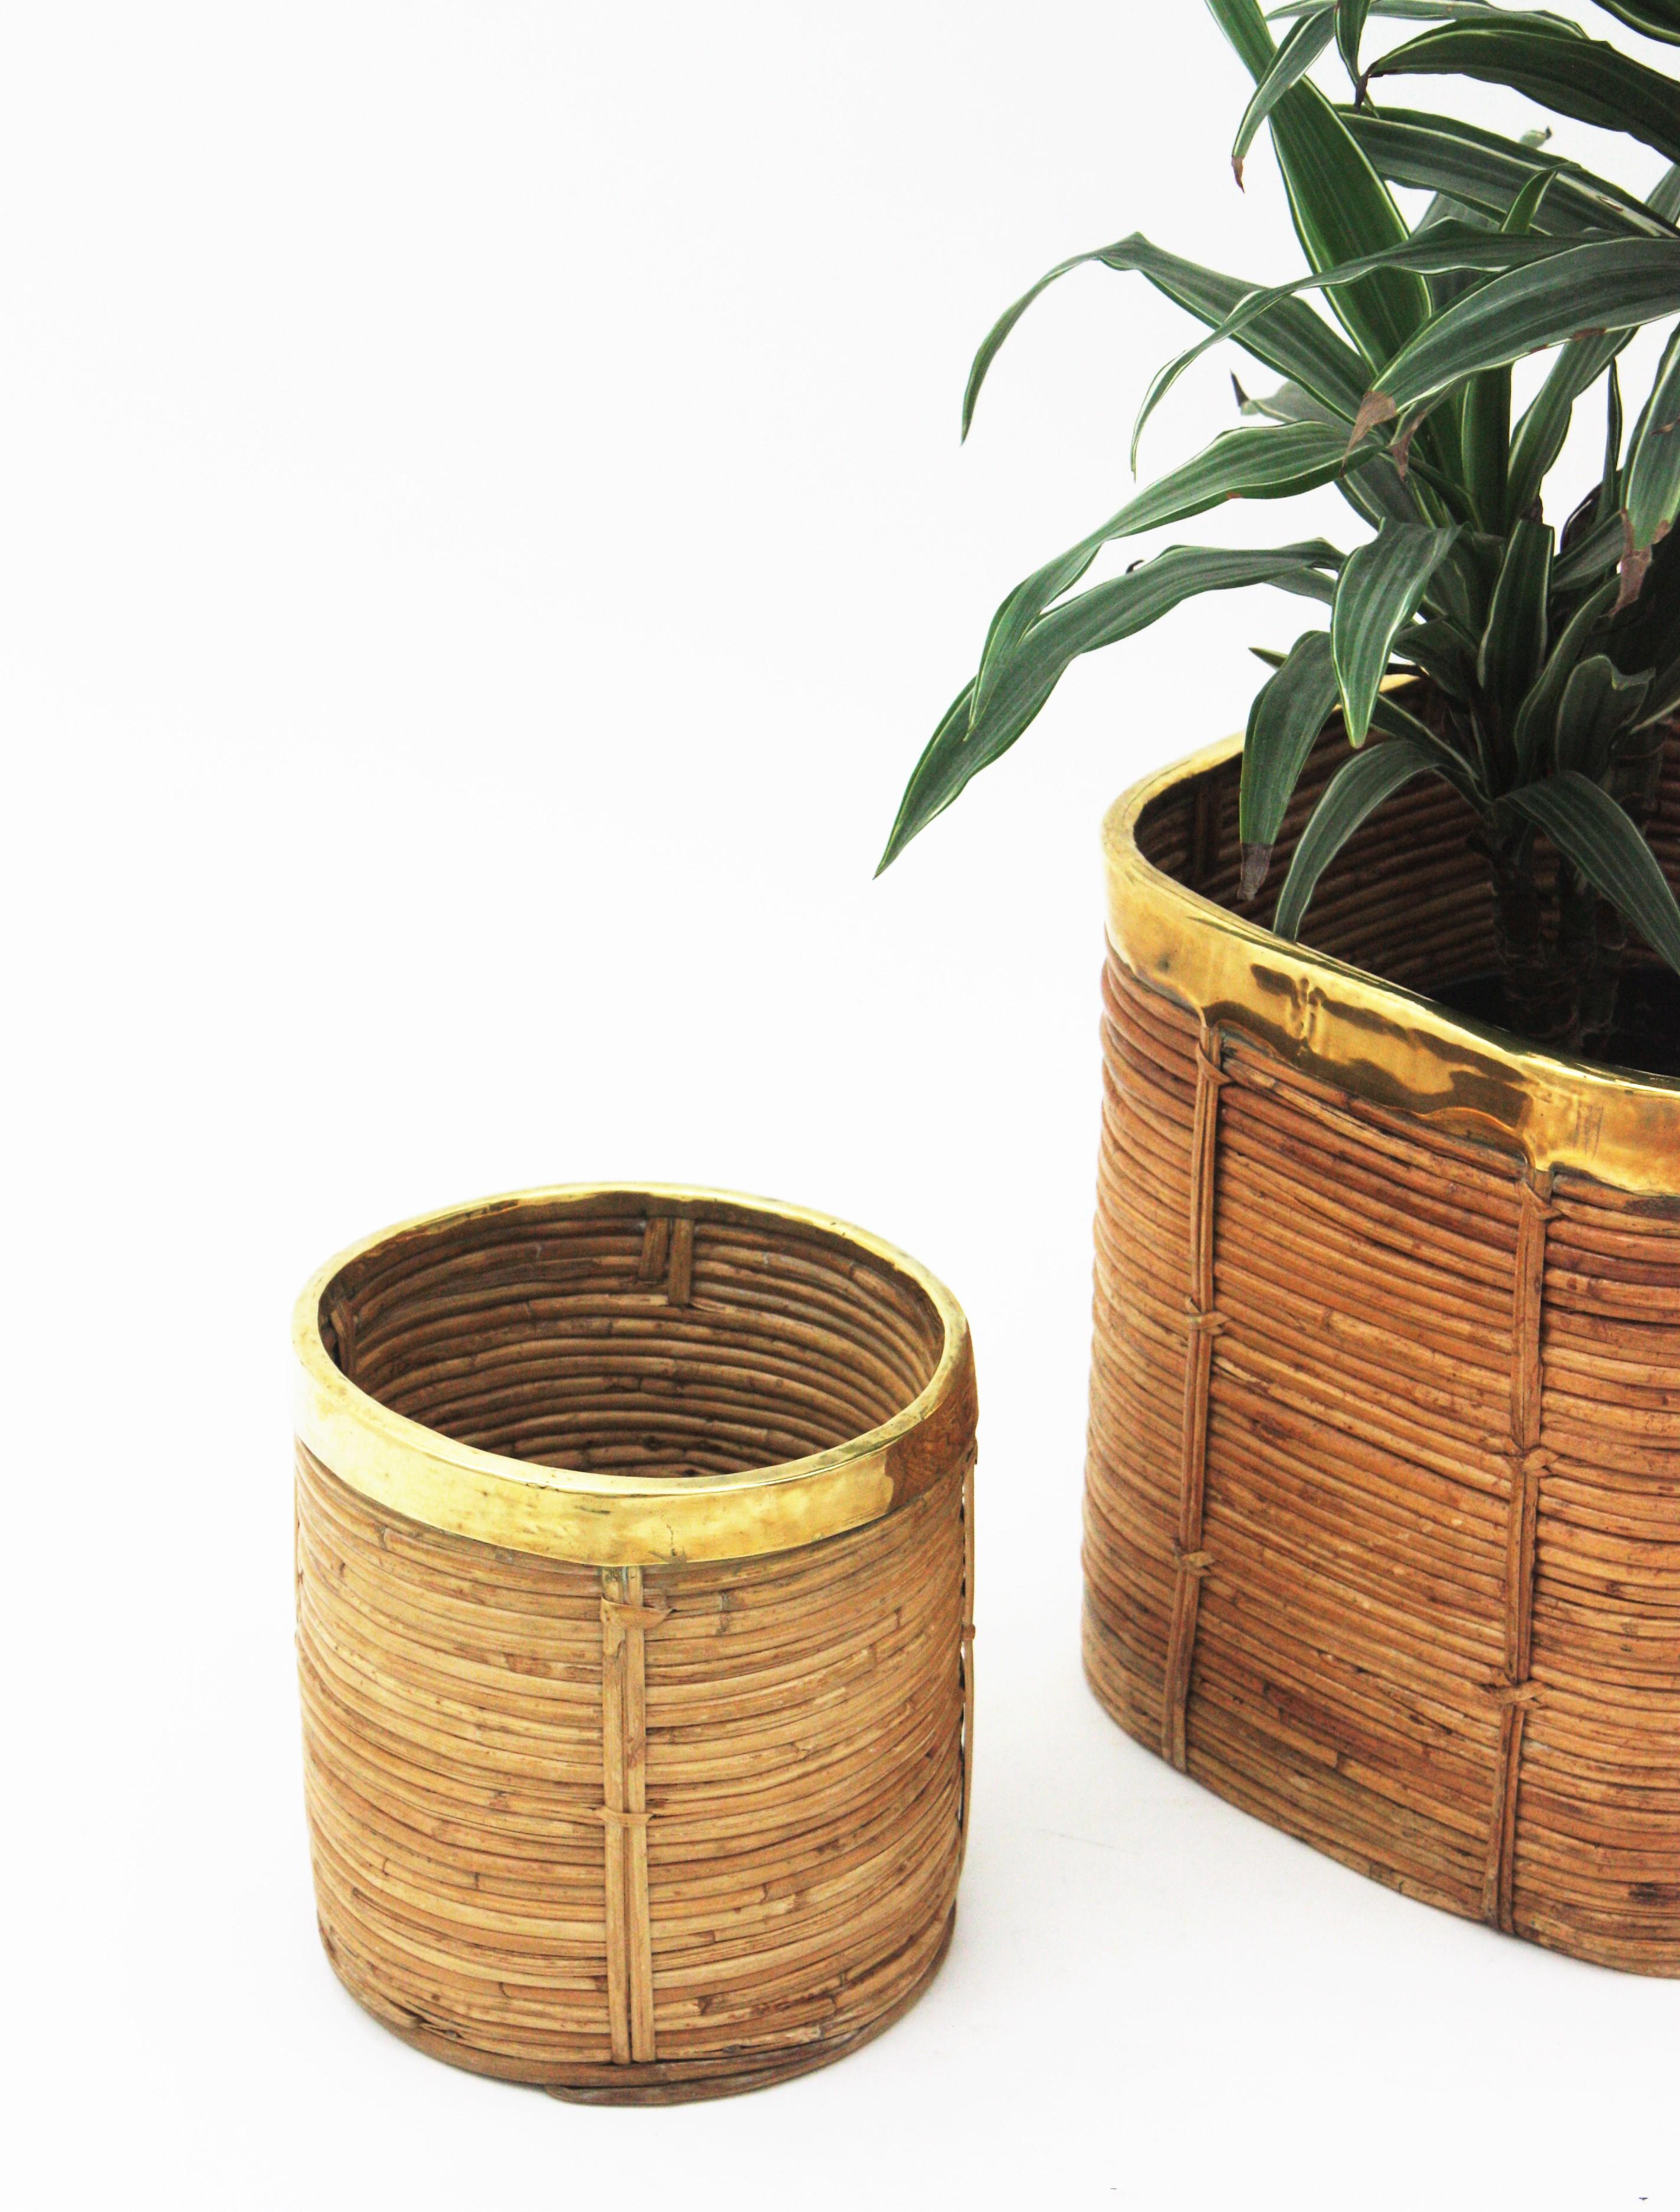 Three Rattan Bamboo Planters / Baskets with Brass Rim, Italy, 1970s For Sale 7